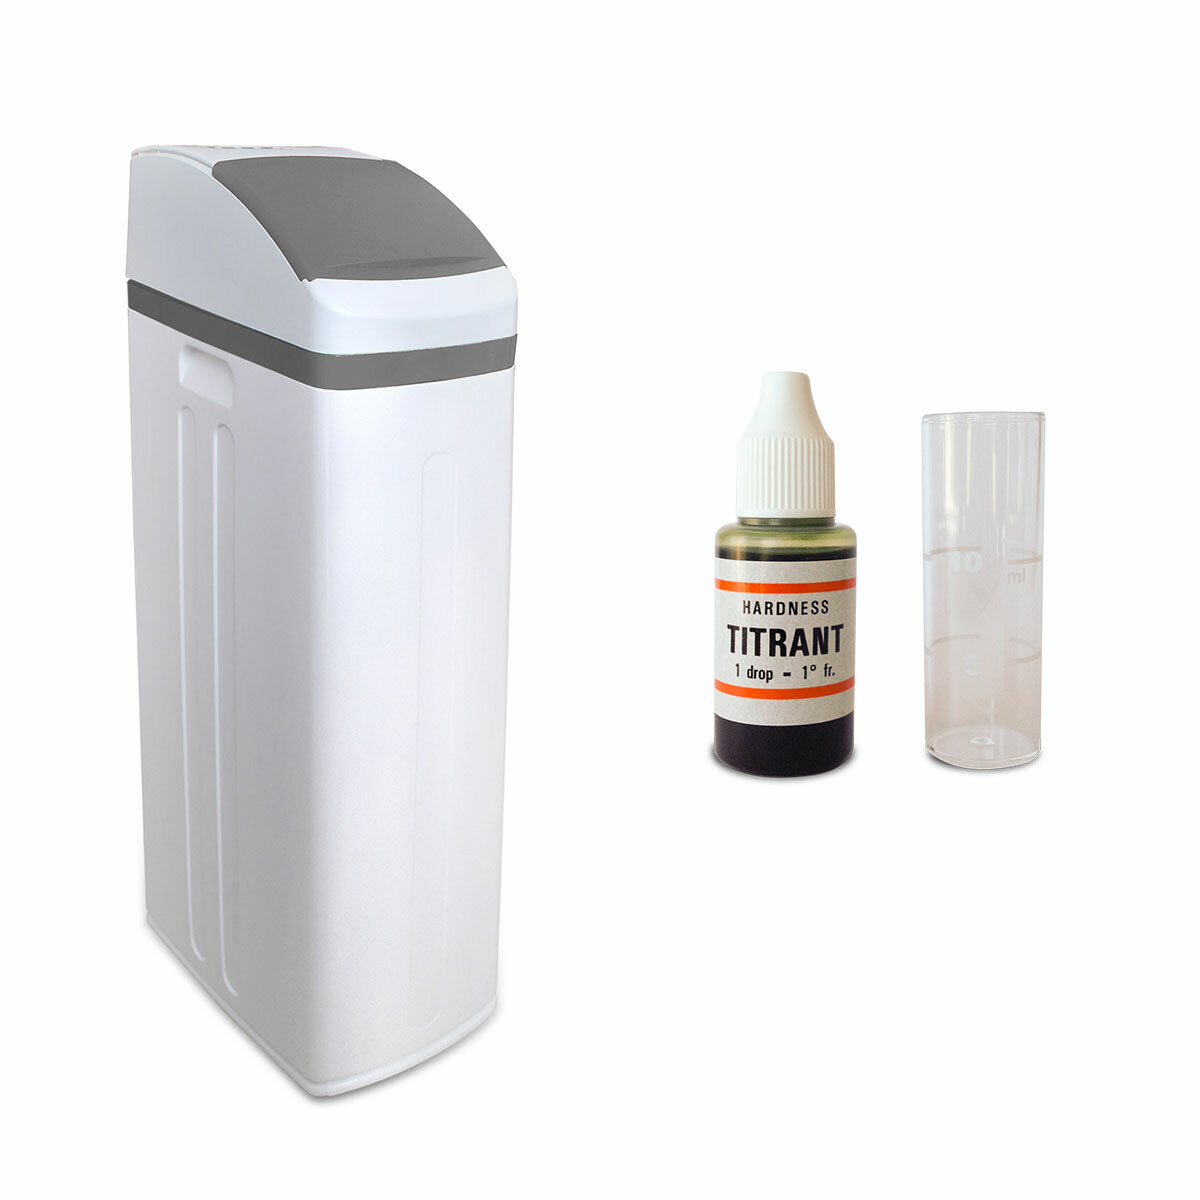 Gel Easy Soft 18 water softener with ion exchange